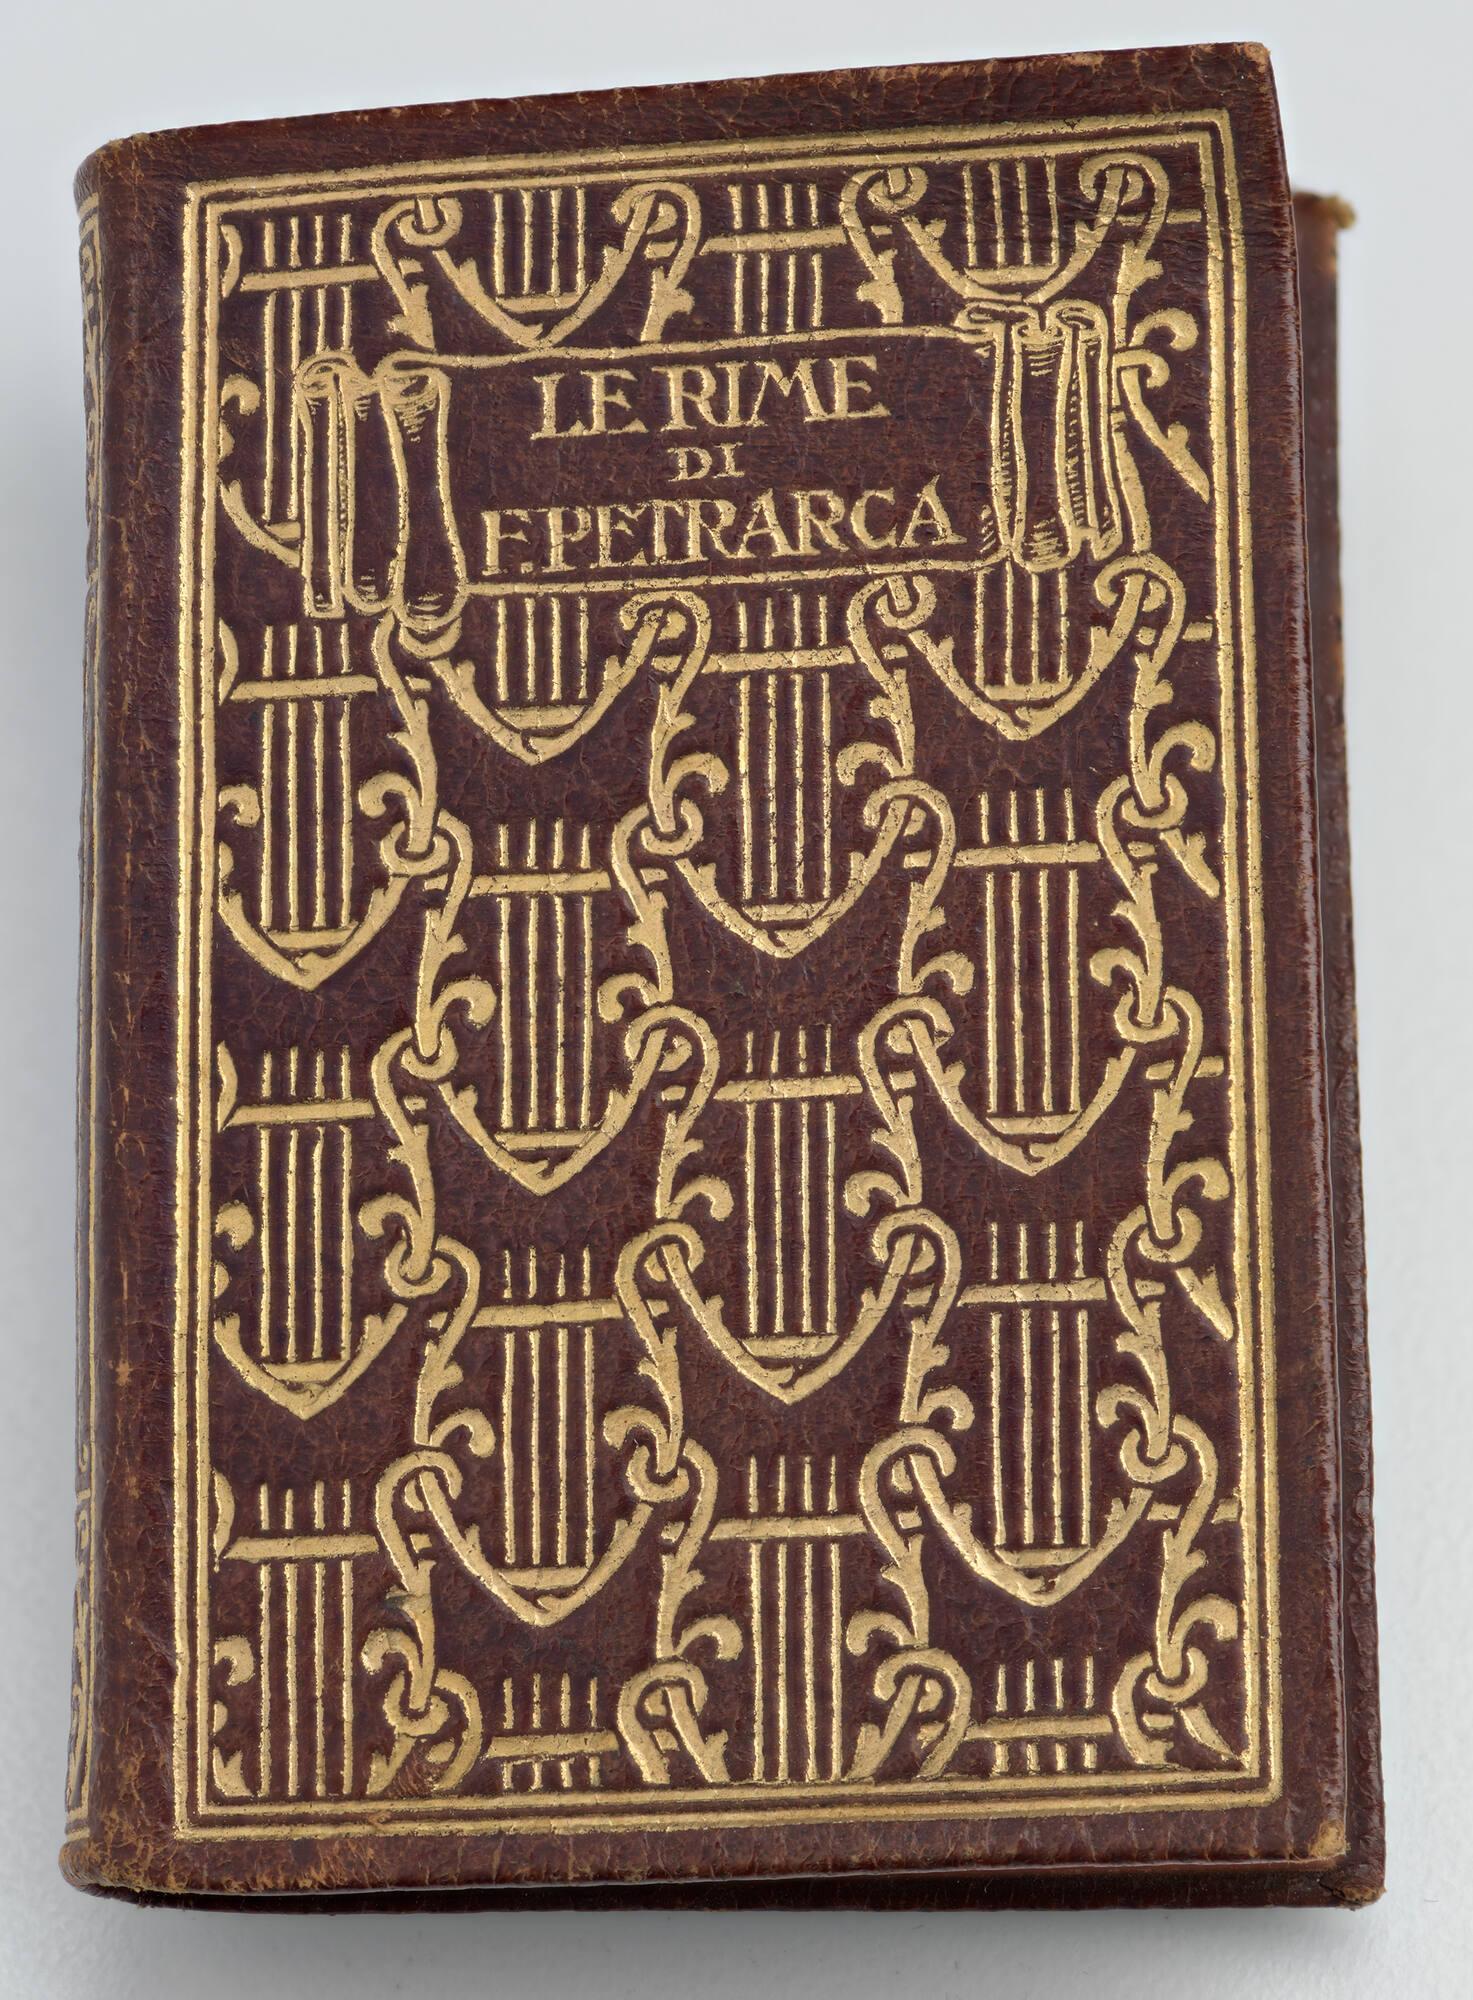 Small red leather book with gilded design and the title Le Rime de F. Petrarca.